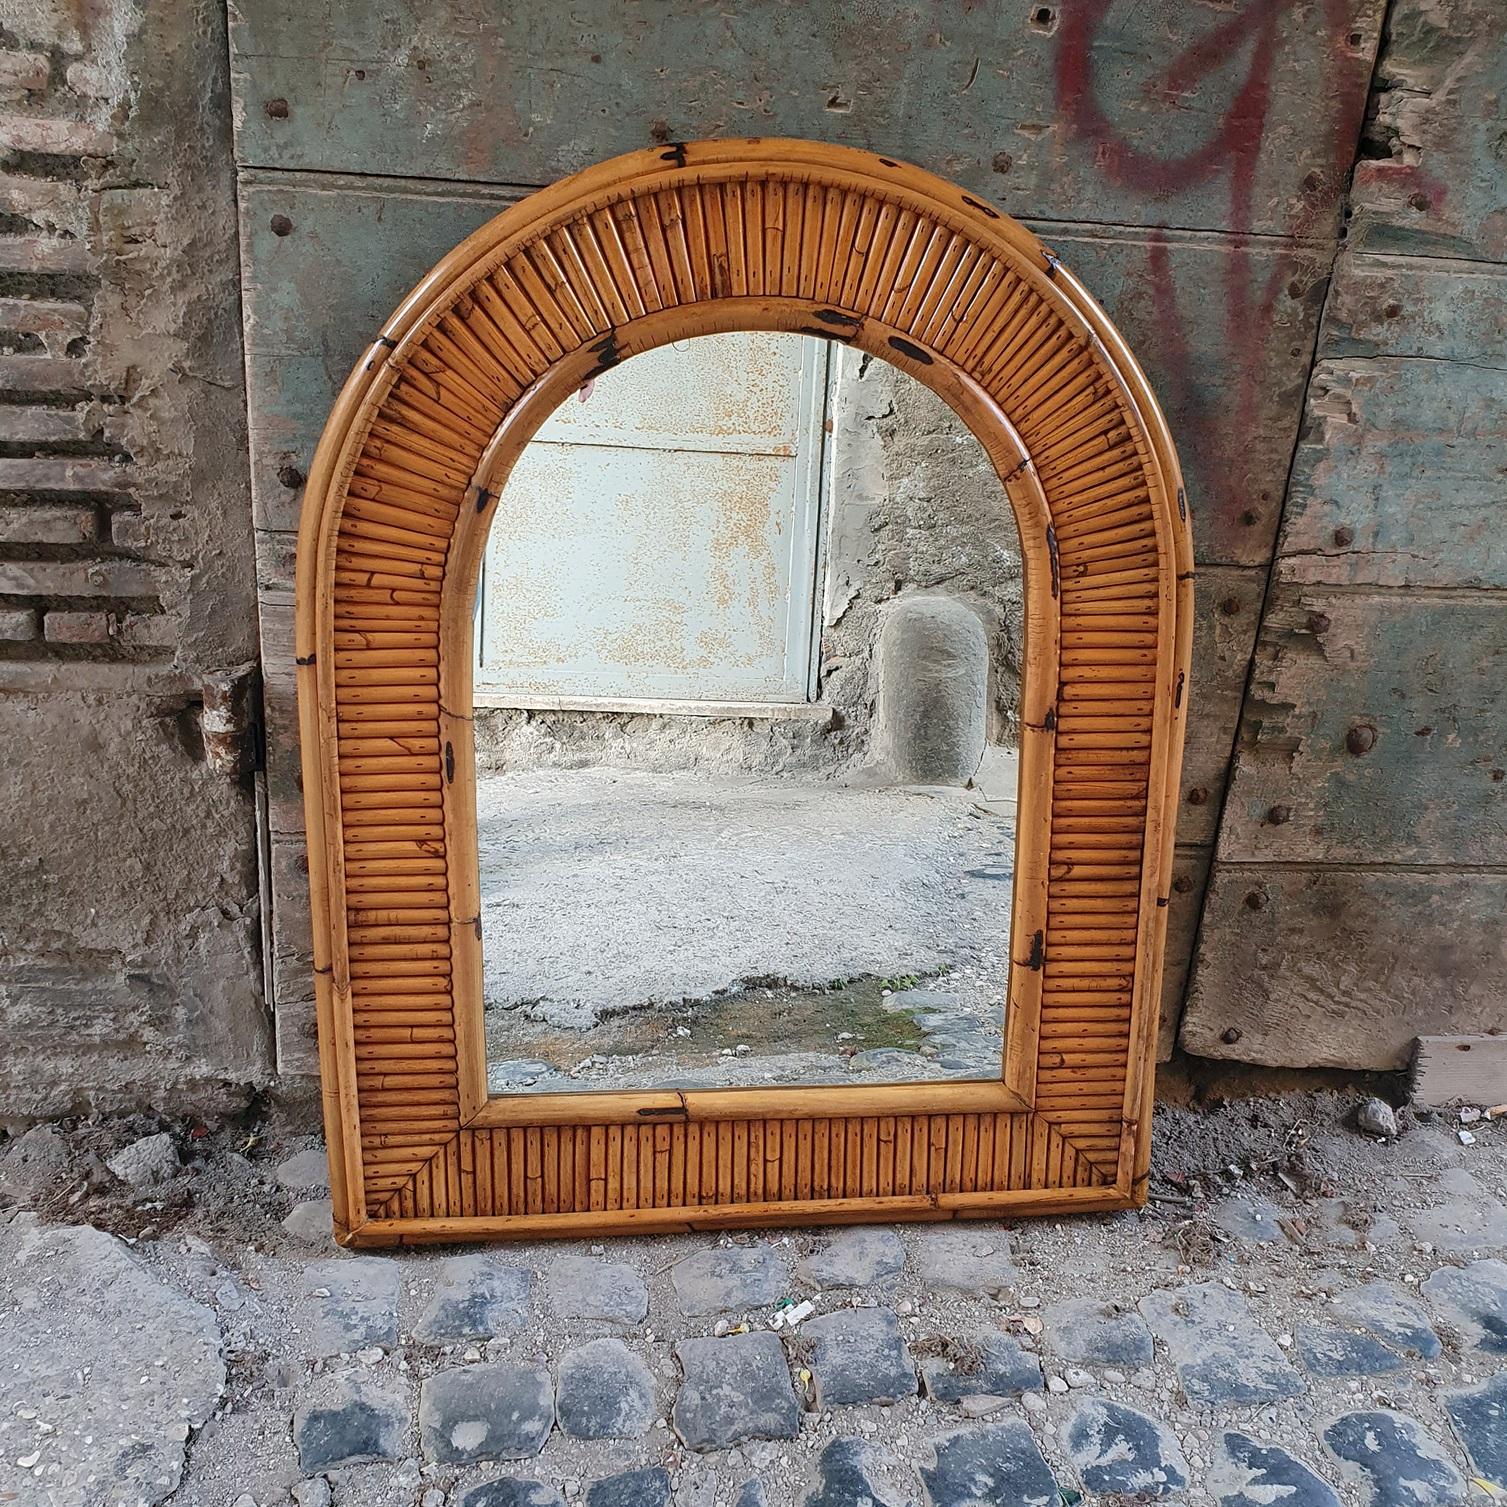 A beautifully crafted arched mirror from the 1960s in bamboo by Italian producer Vivai del Sud. 

Vivai del Sud was an Italian furniture manufacturer that gained prominence in the 1950s. The company was renowned for its innovative use of natural